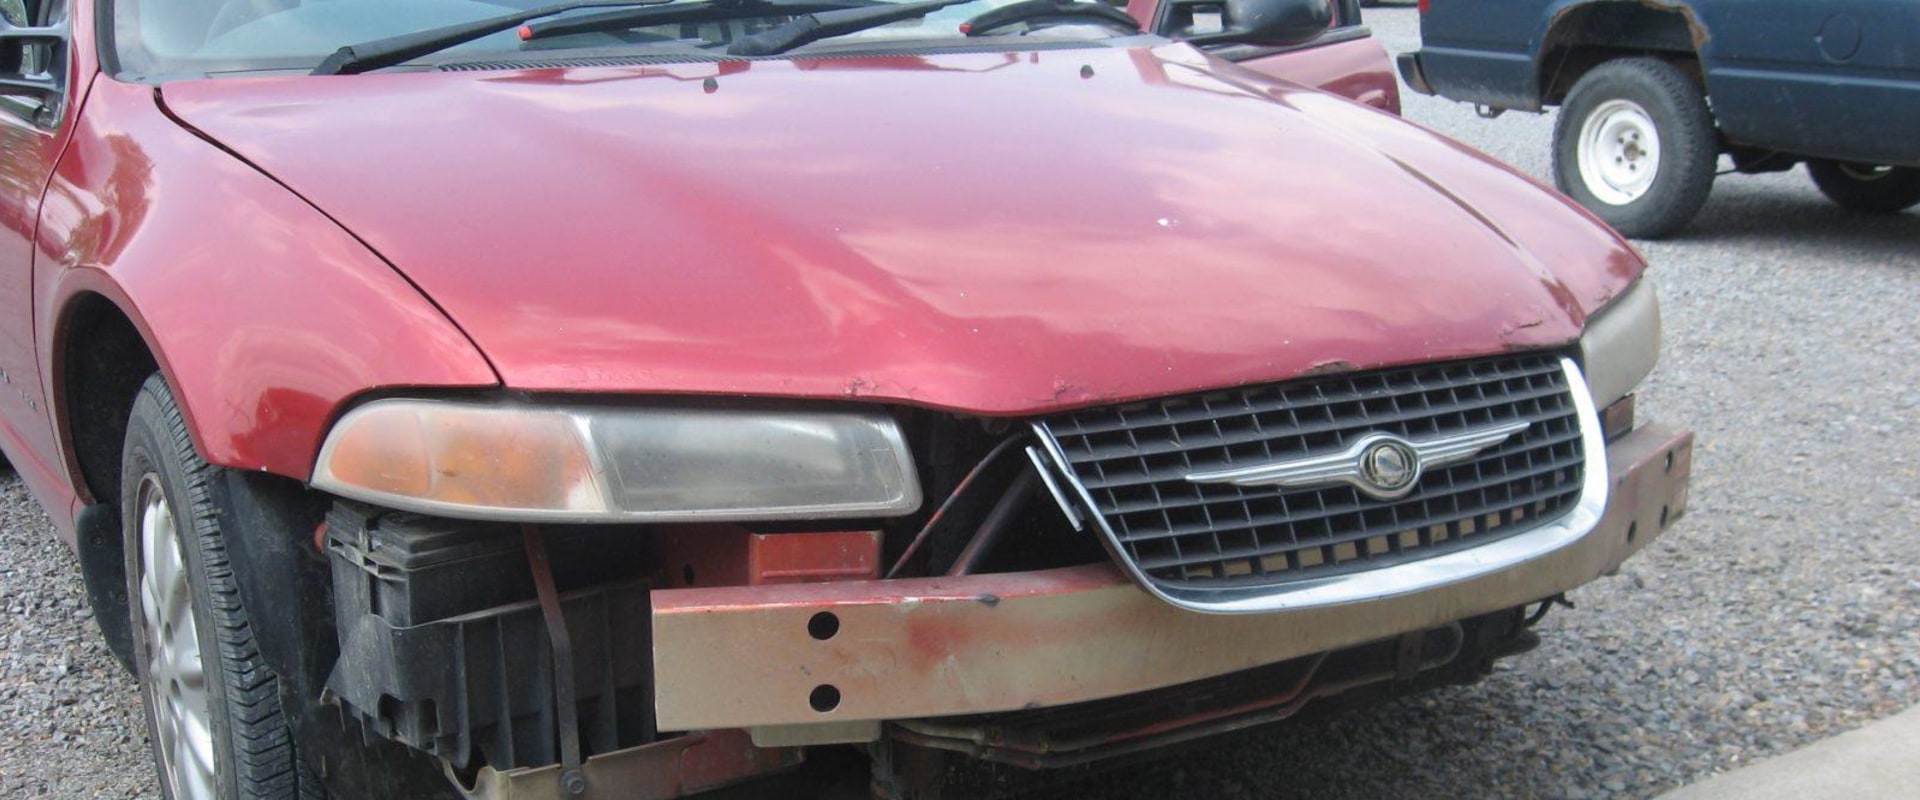 Bumper Replacement: An Overview of Replacing Your Classic Car Bumper